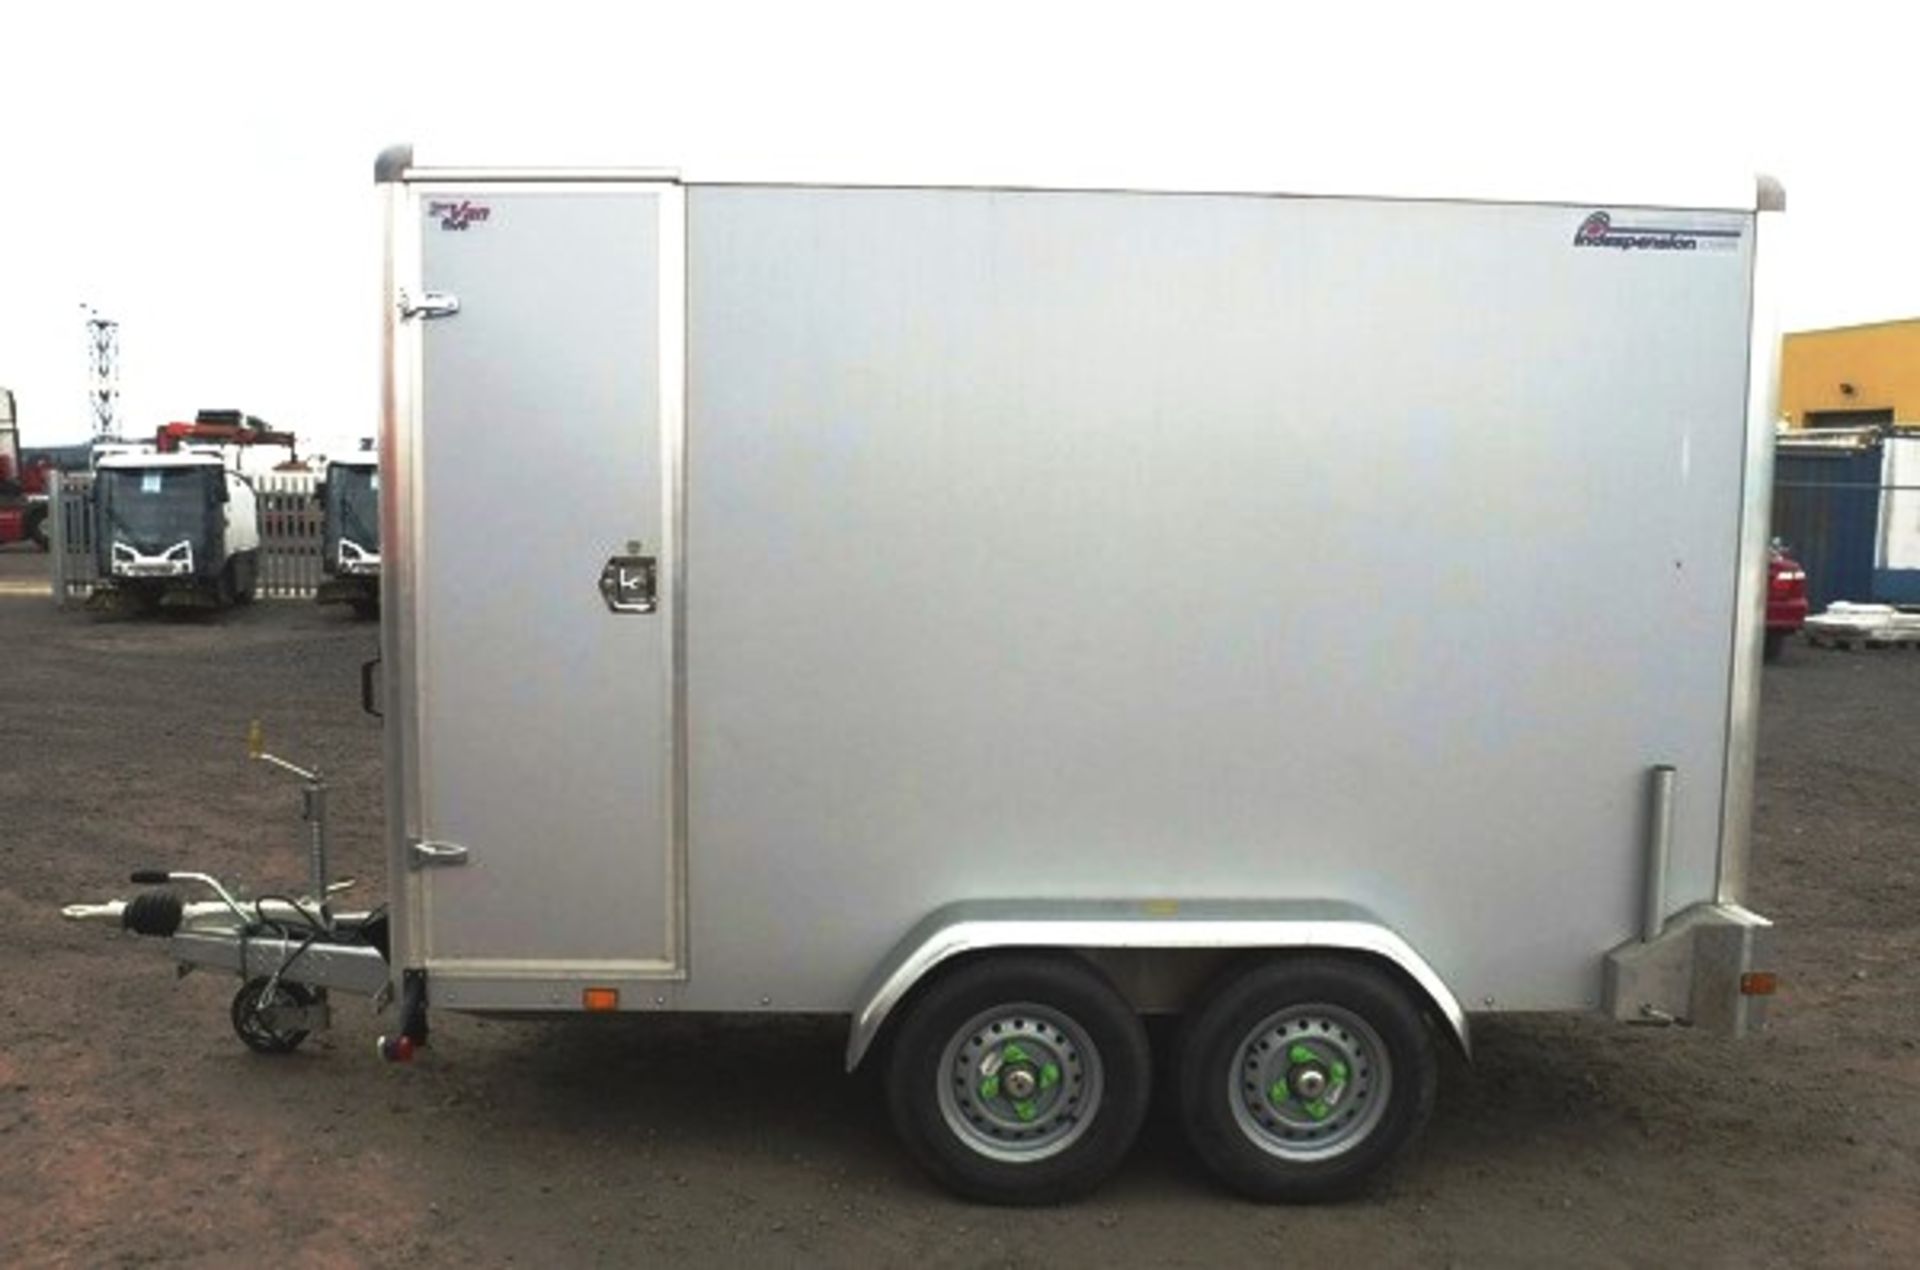 INDESPENSION BOX TRAILER WITH 2 OPENING BACK DOORS & 1 SIDE DOOR, 10FT X 5FT (APPROX) S/N213526 ASSE